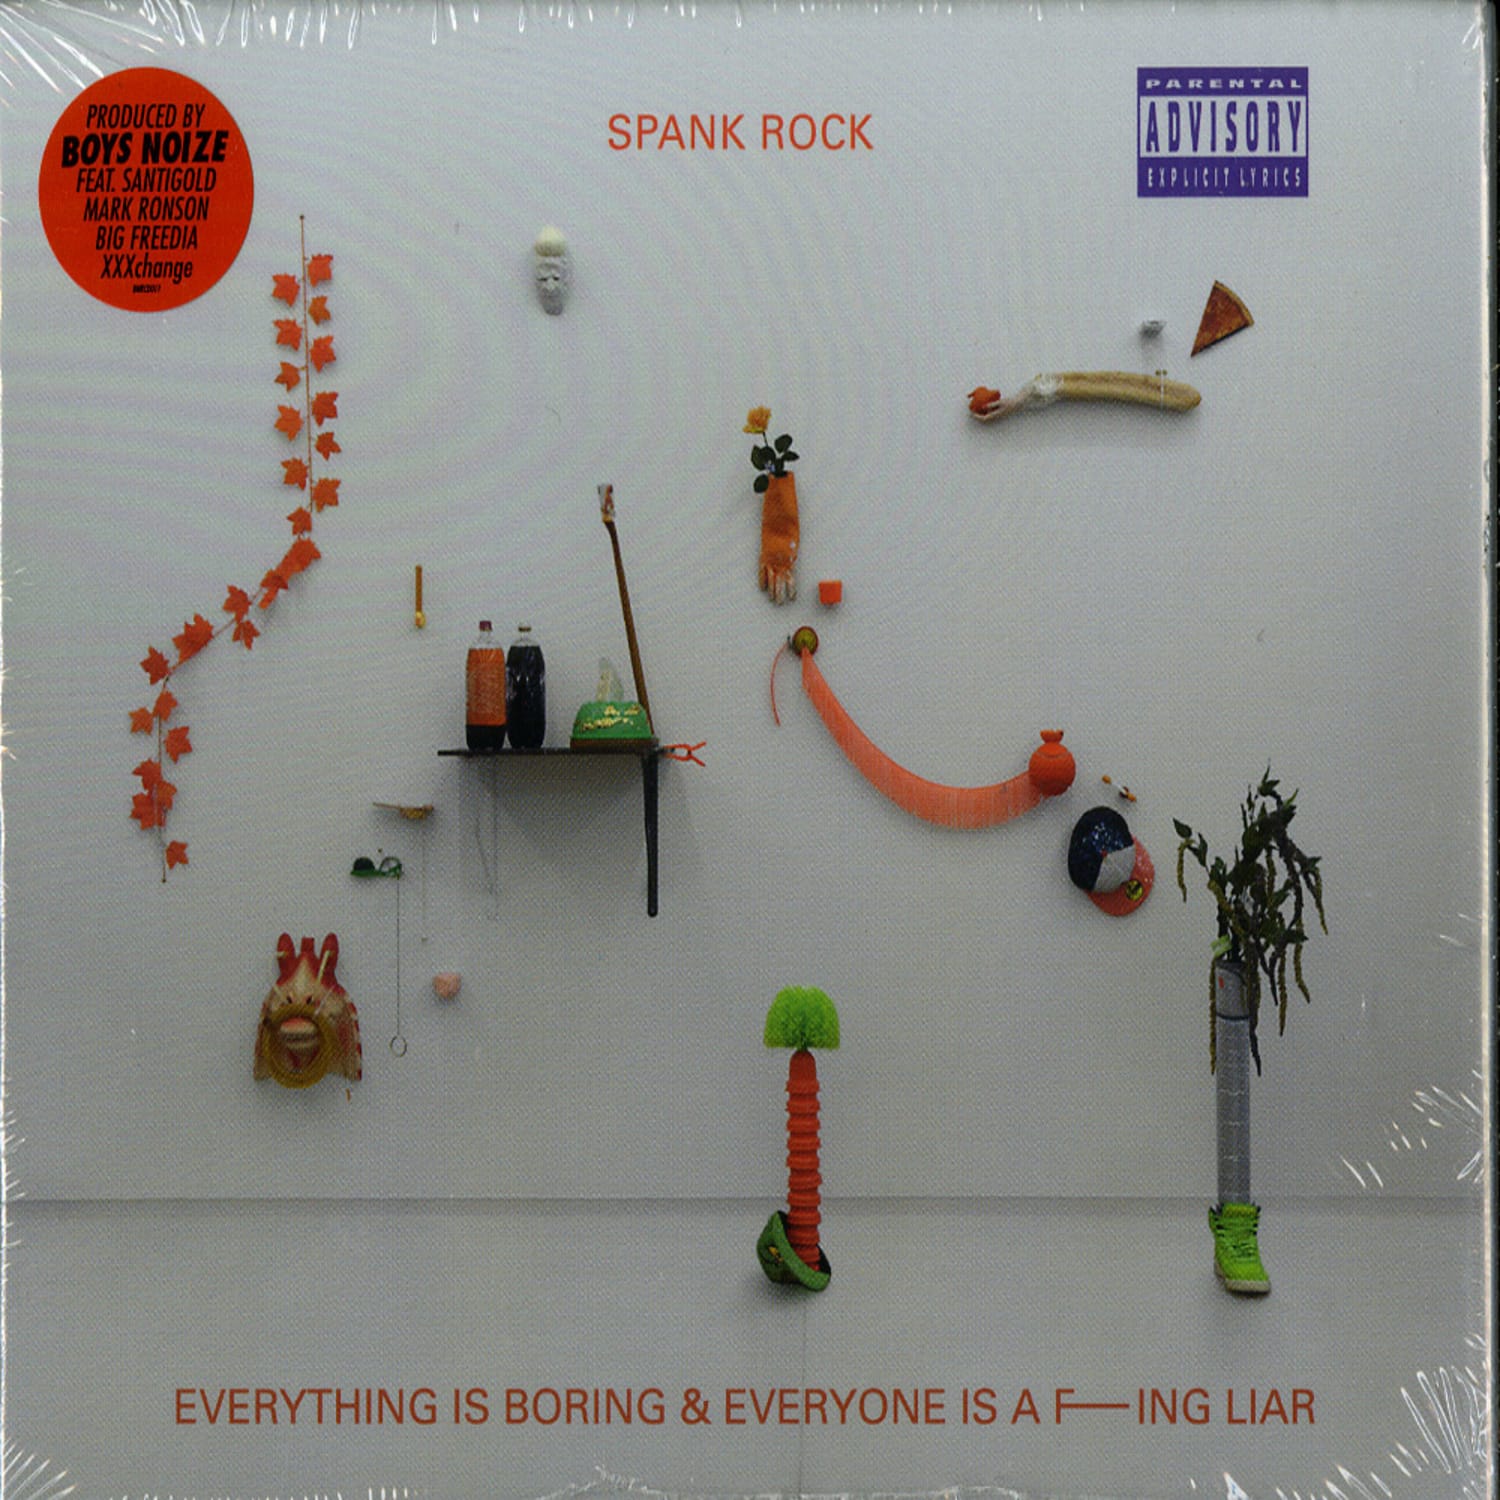 Spank Rock - EVERYTHING IS BORING AND EVERYONE IS A F 